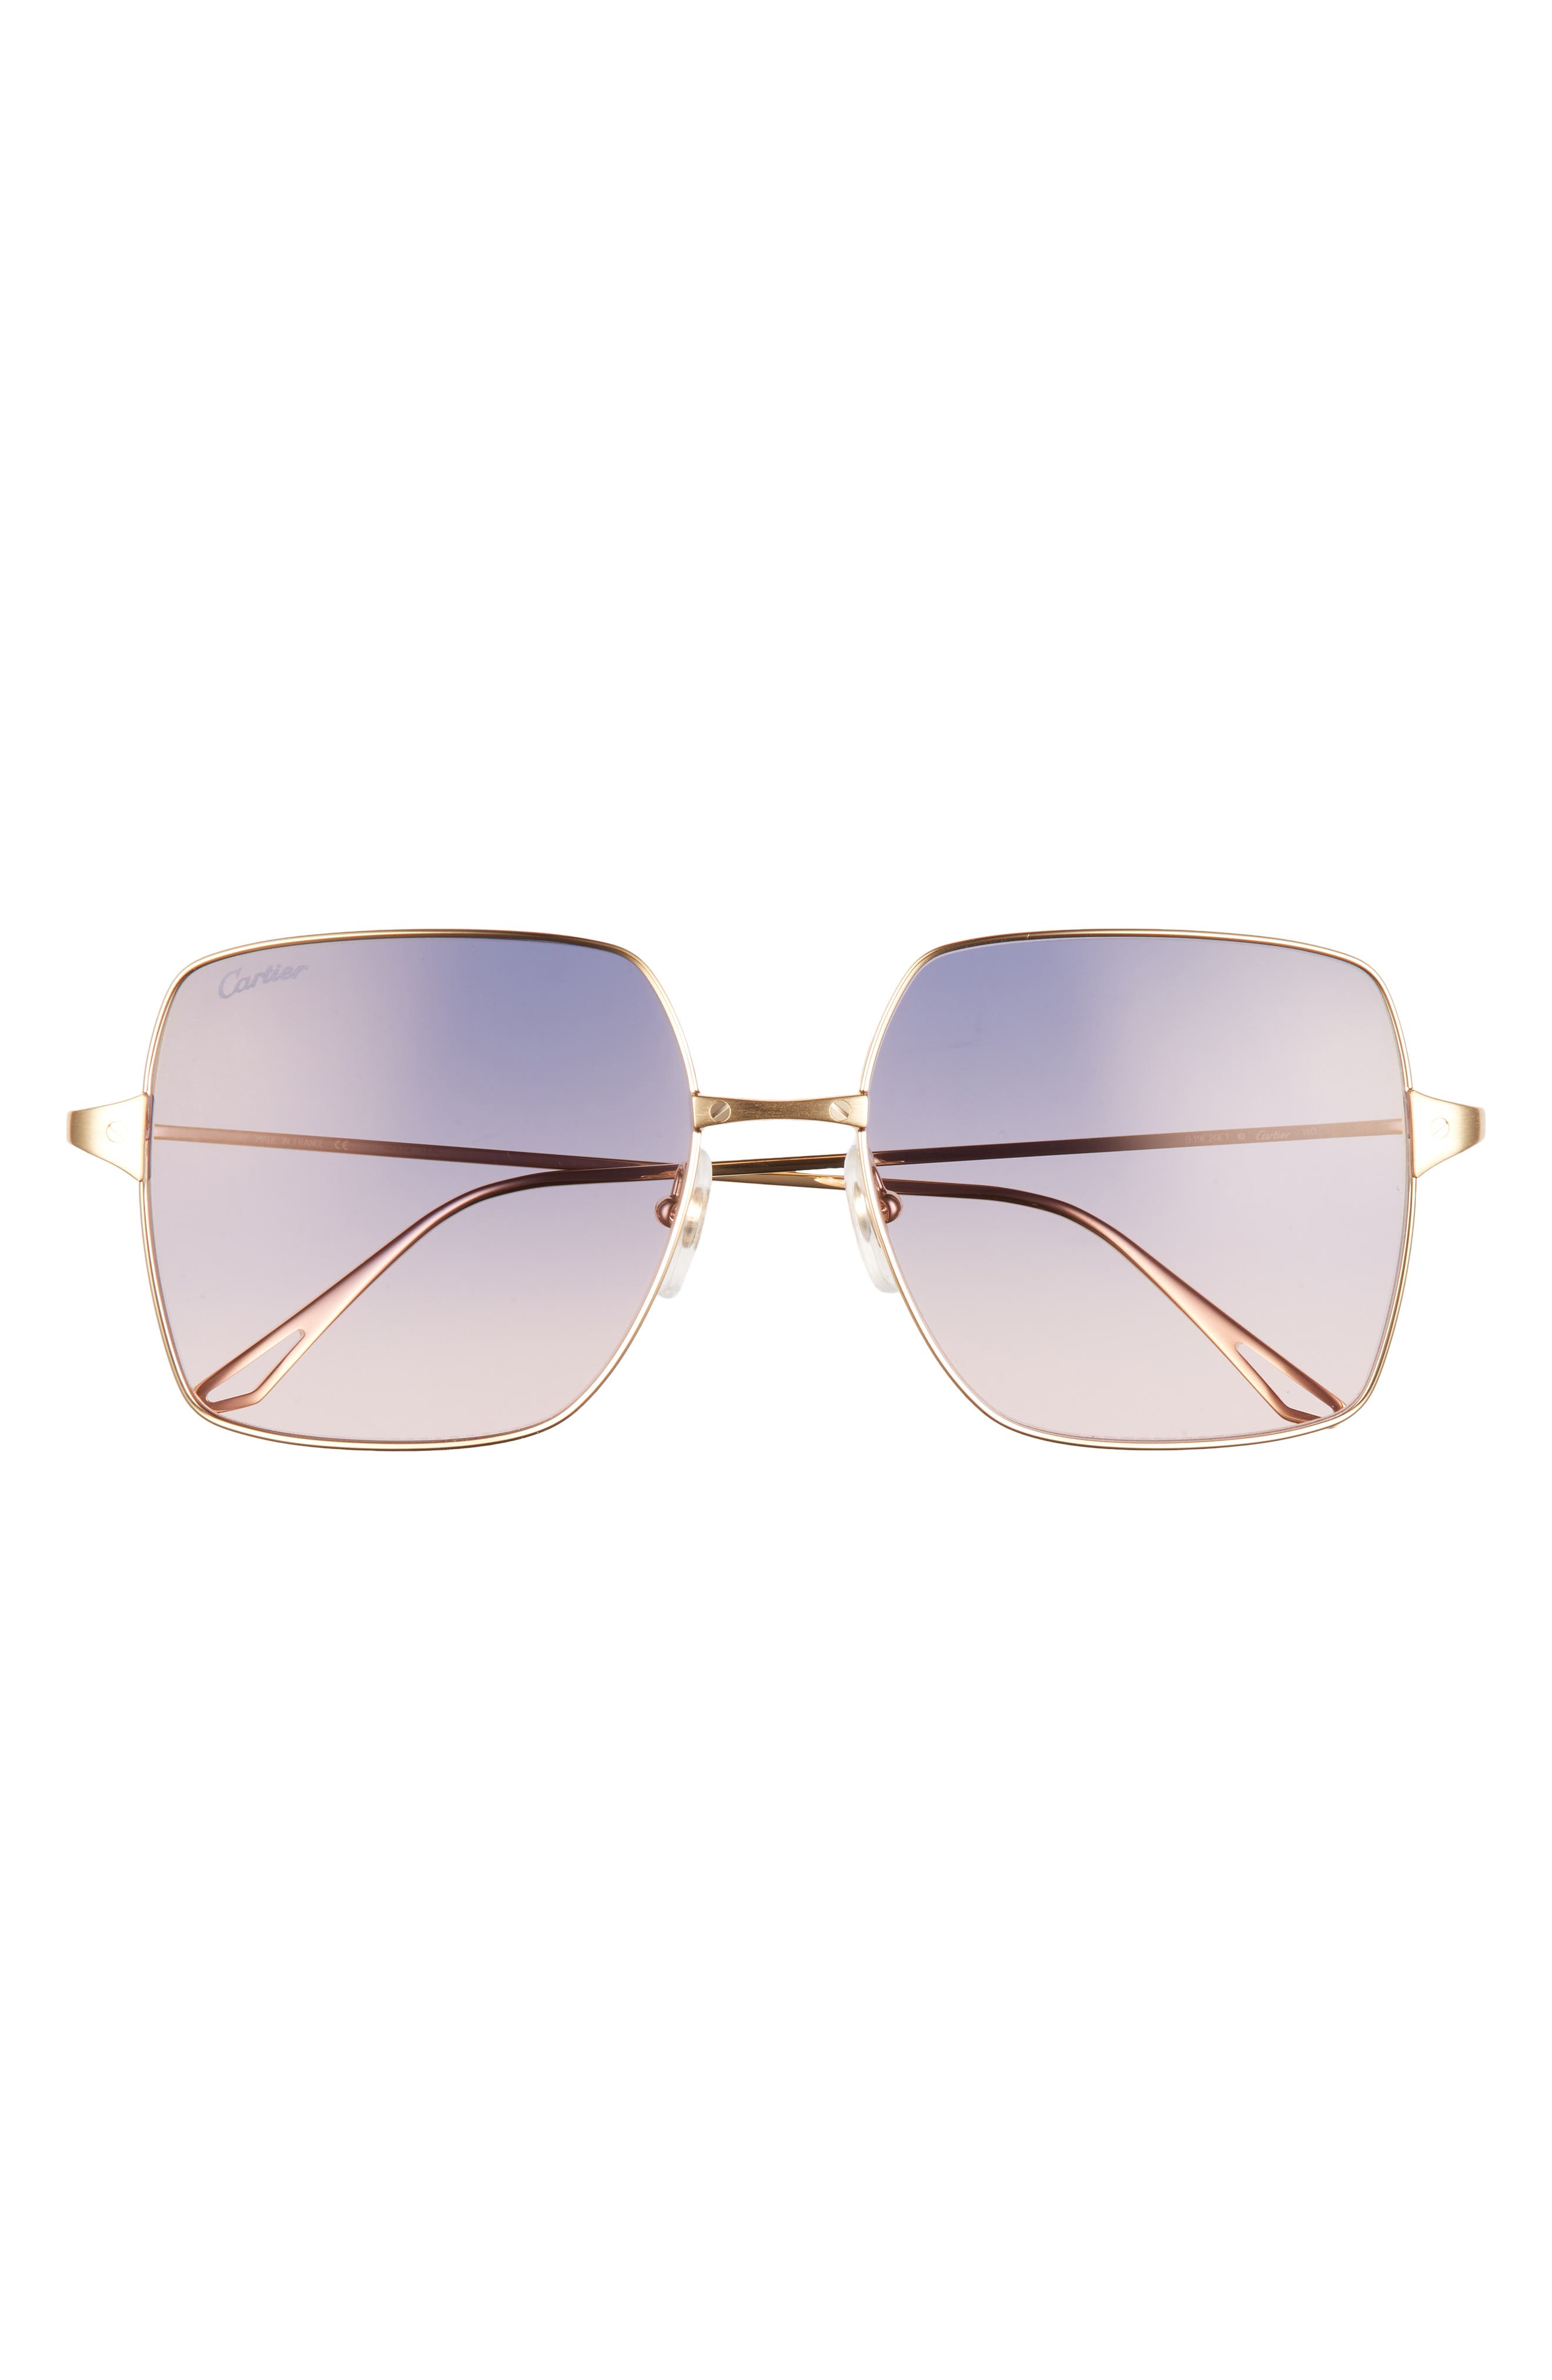 Cartier 57mm Square Sunglasses in Gold/Blue at Nordstrom